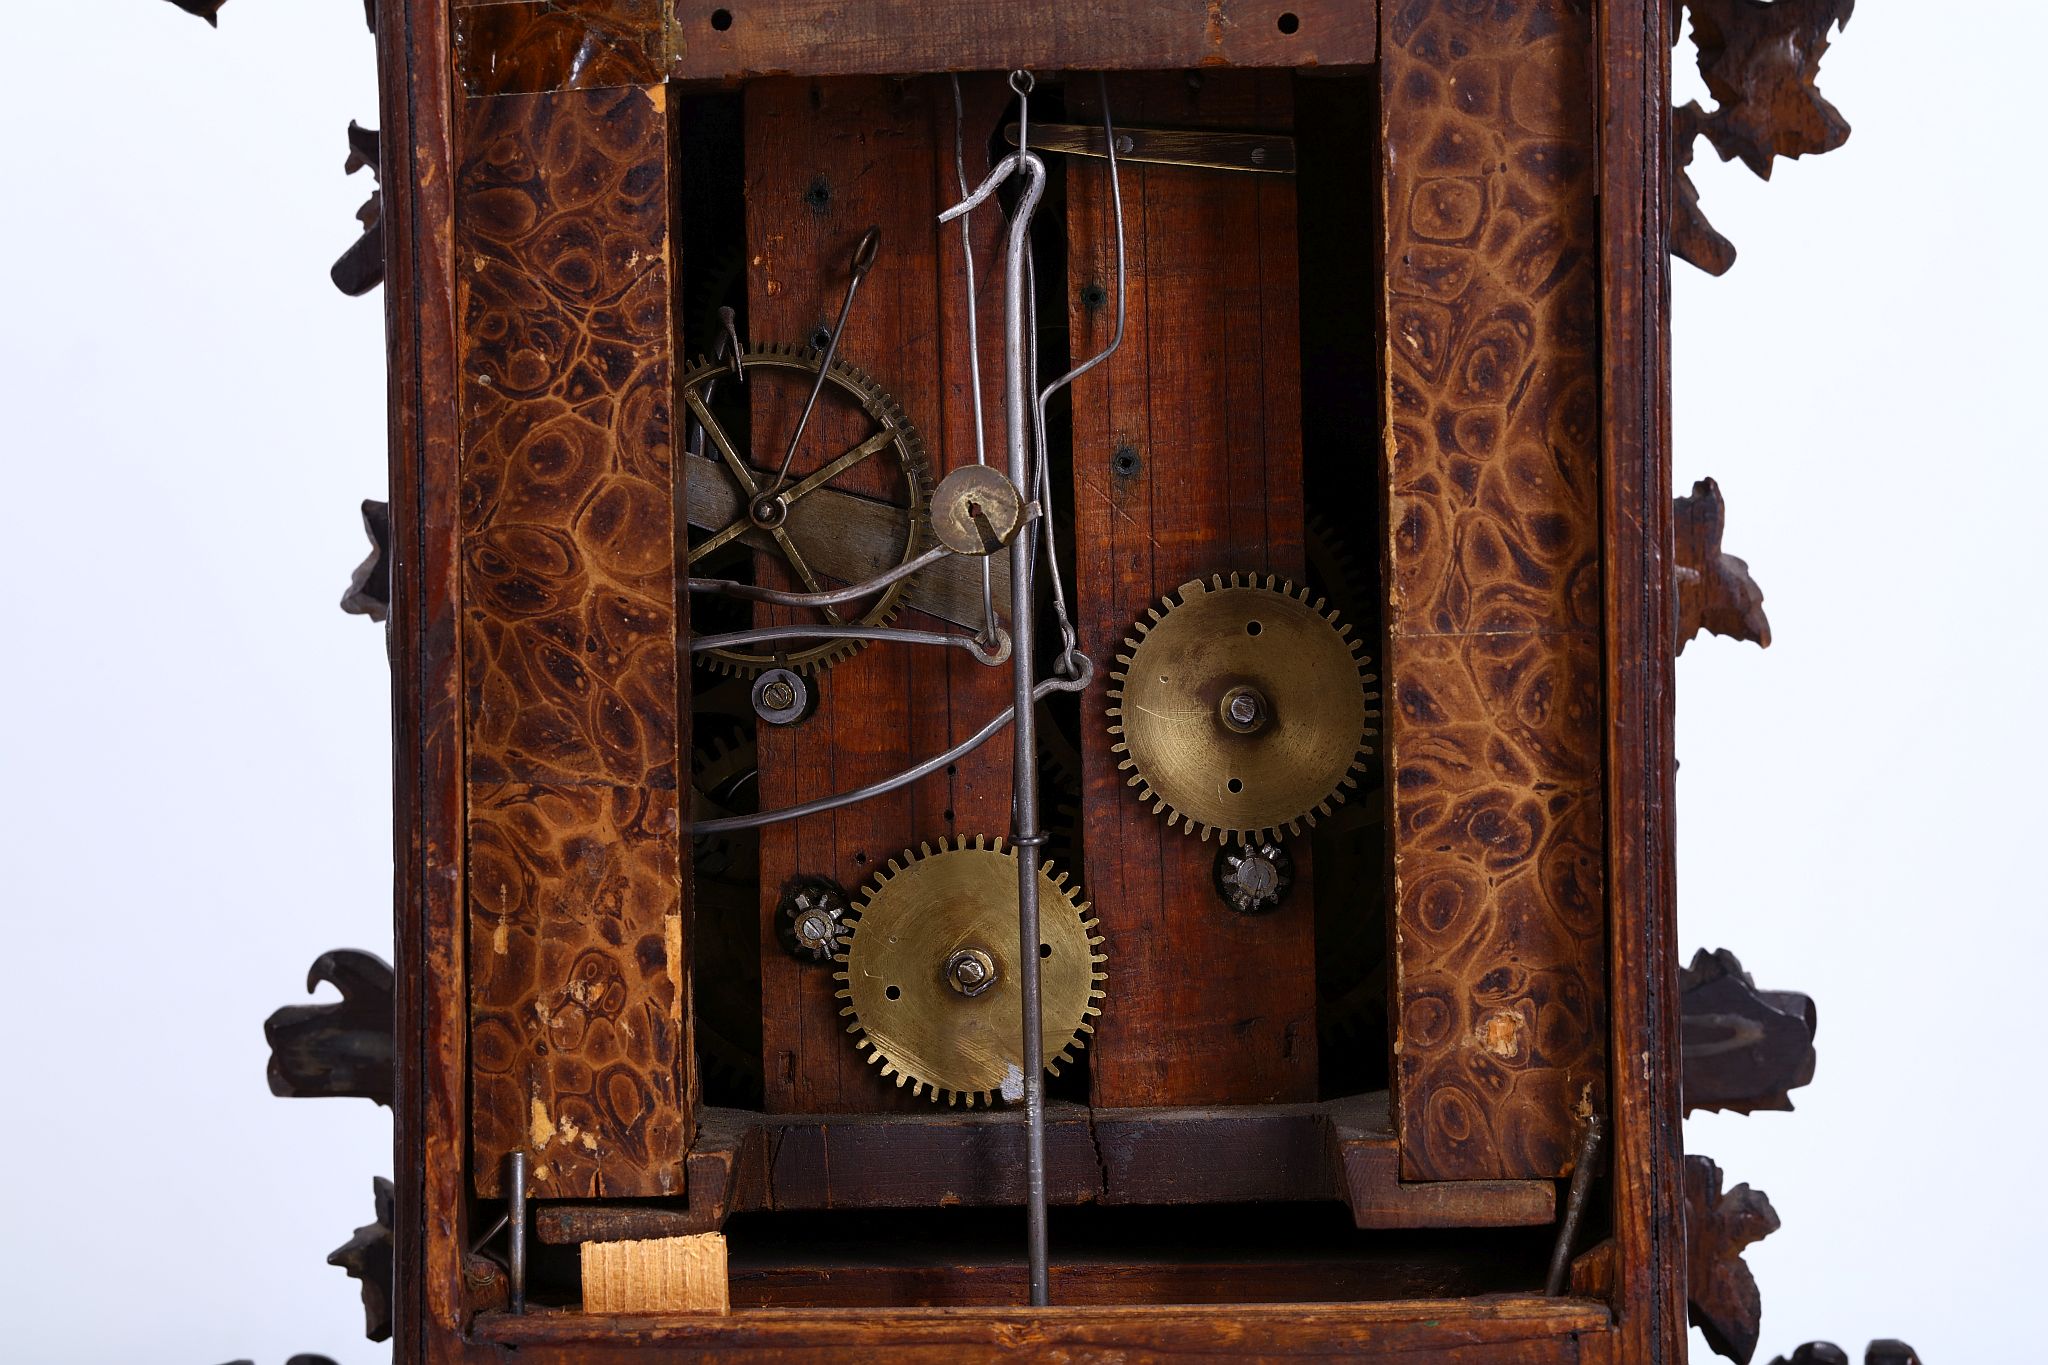 WITHDRAWN A 19TH CENTURY BLACK FOREST CARVED WOOD CUCKOO CLOCK of typical form with pitched roof - Image 3 of 6